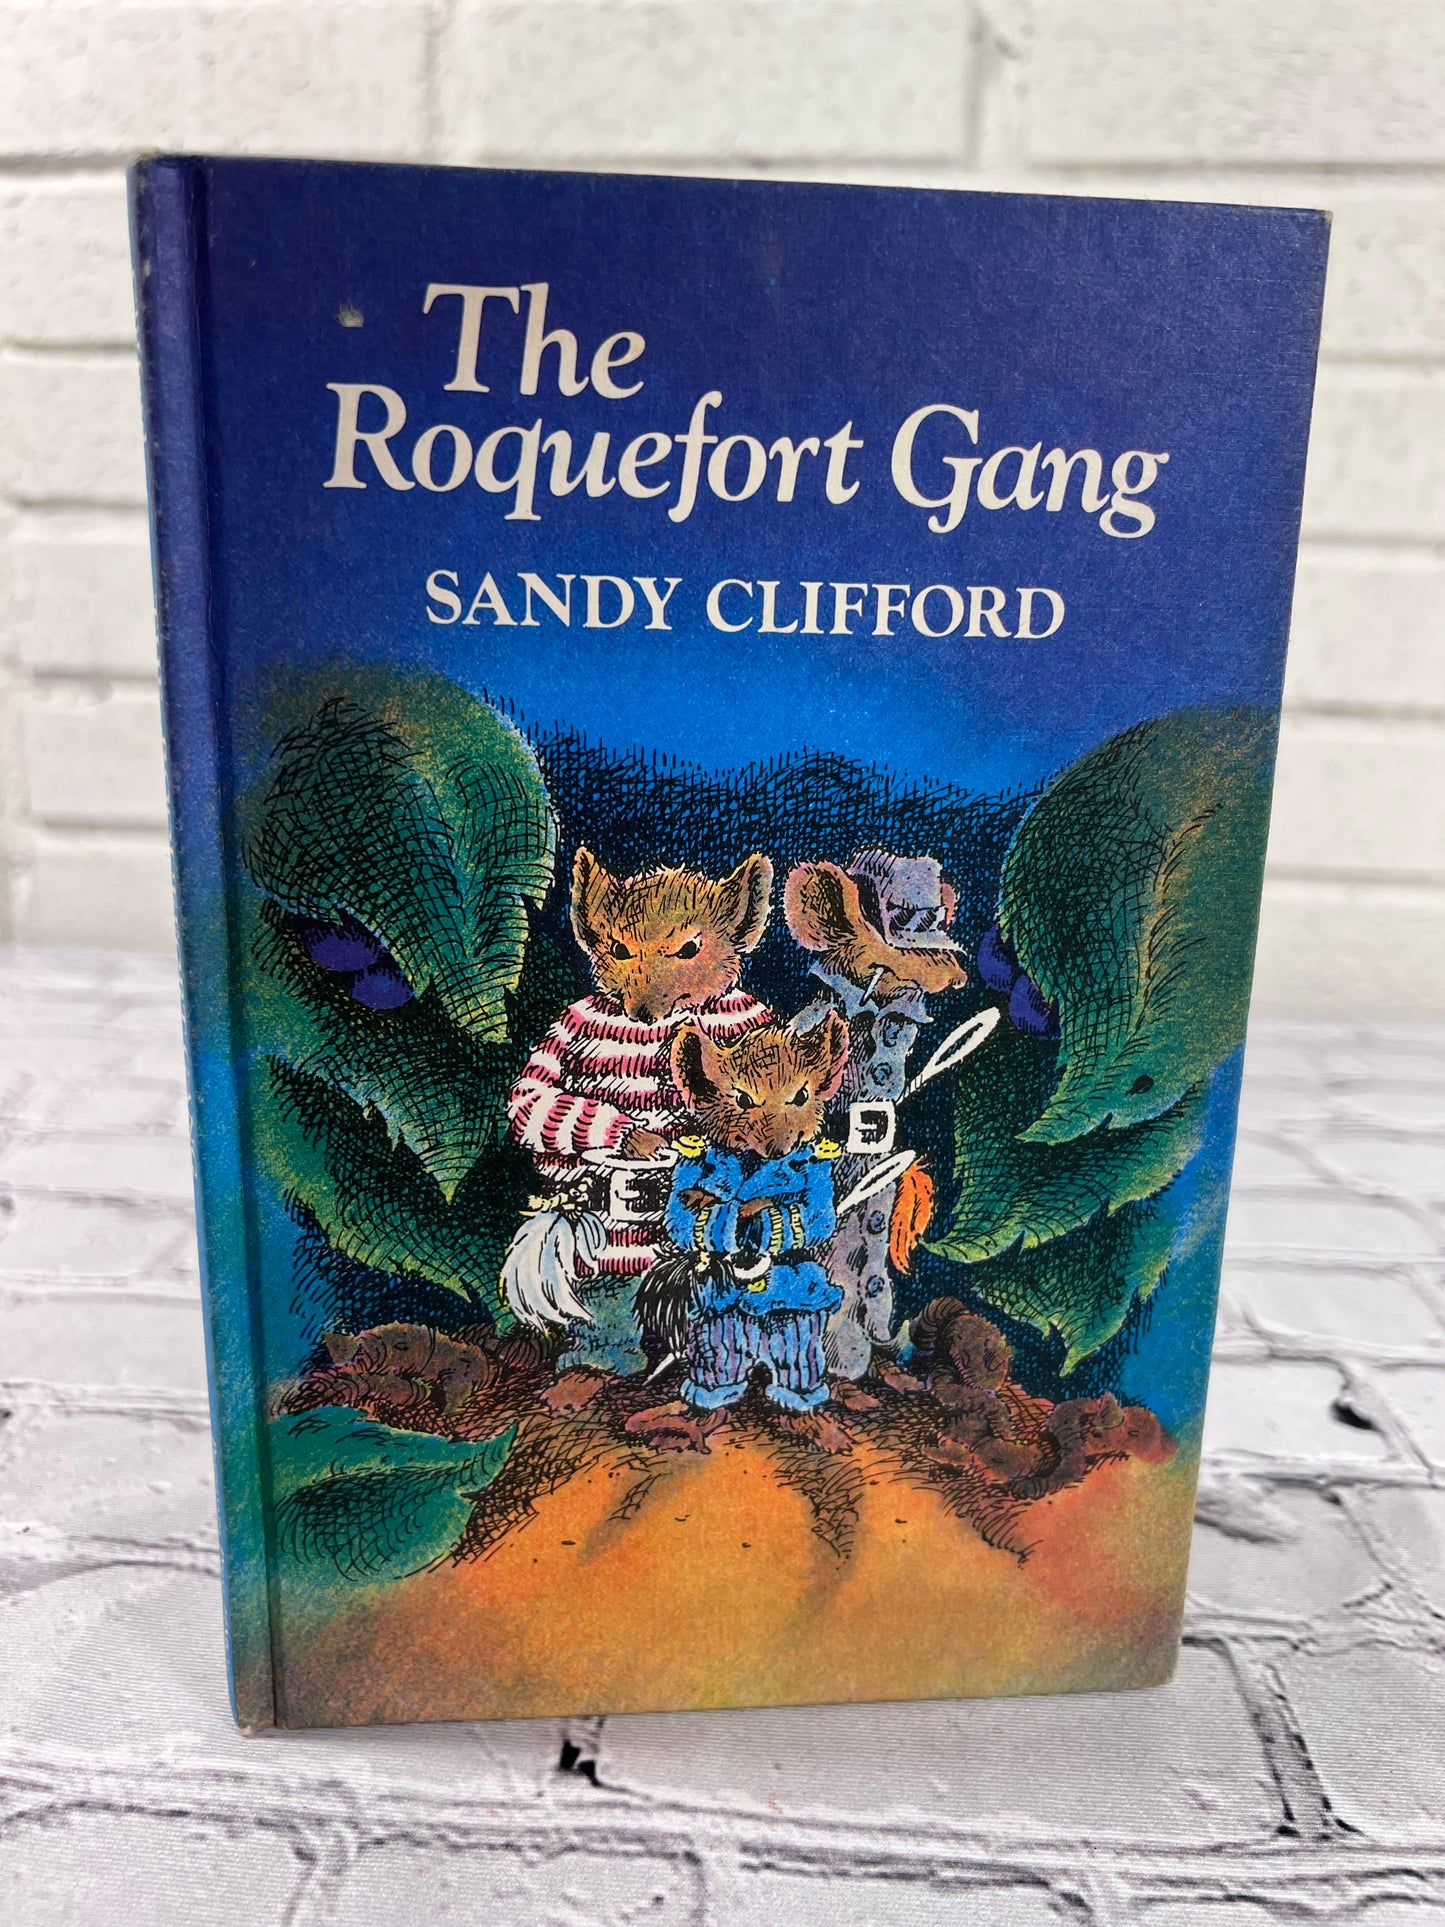 The Roquefort Gang by Sandy Clifford [1981]